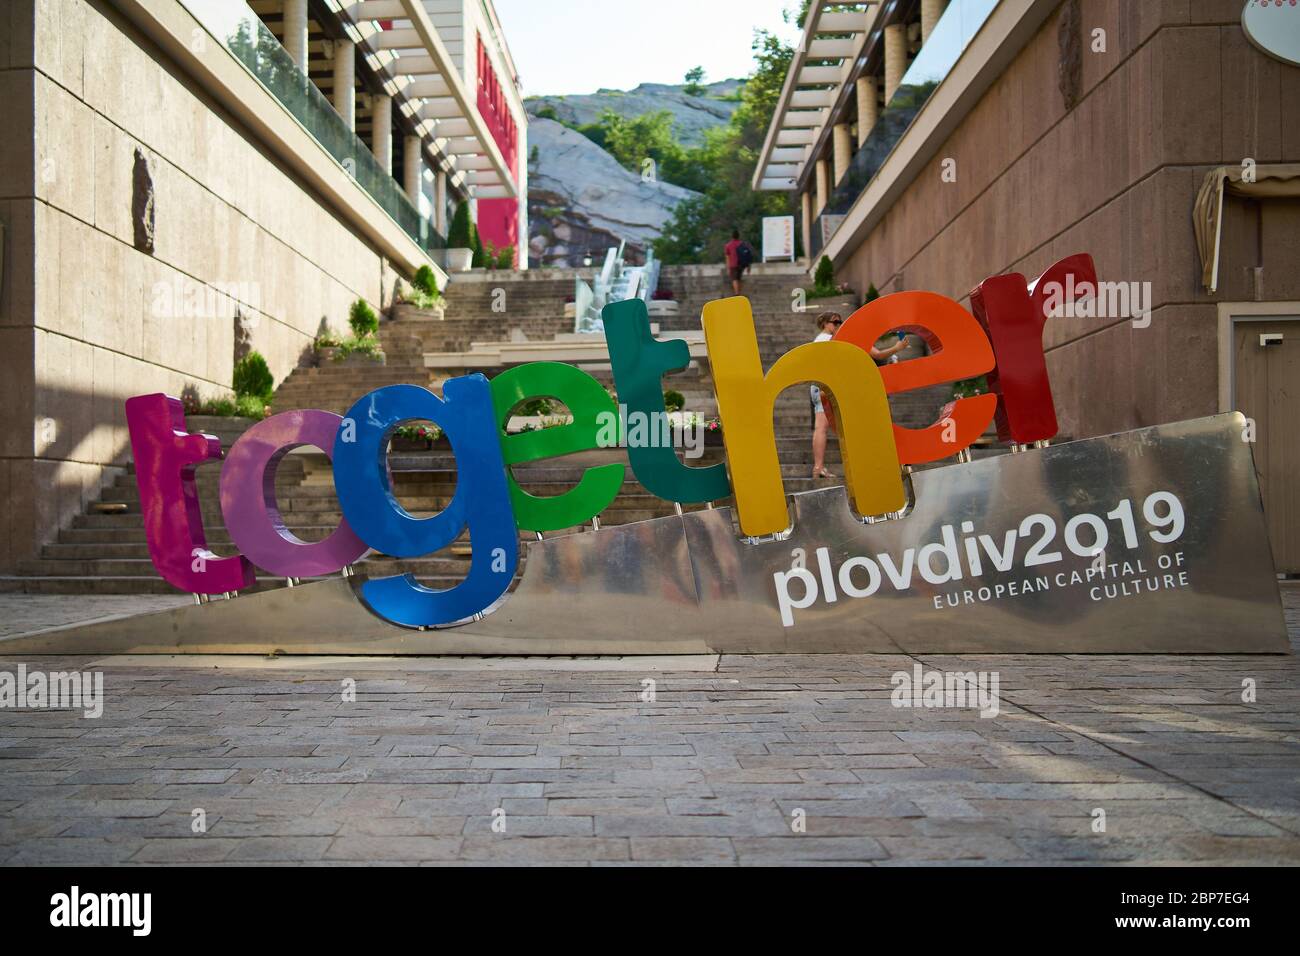 PLOVDIV, BULGARIA - JULY 02, 2019: The symbol 'together' is the European Union's cultural initiative. Plovdiv is the first Bulgarian city chosen to be European Capital of Culture. Stock Photo